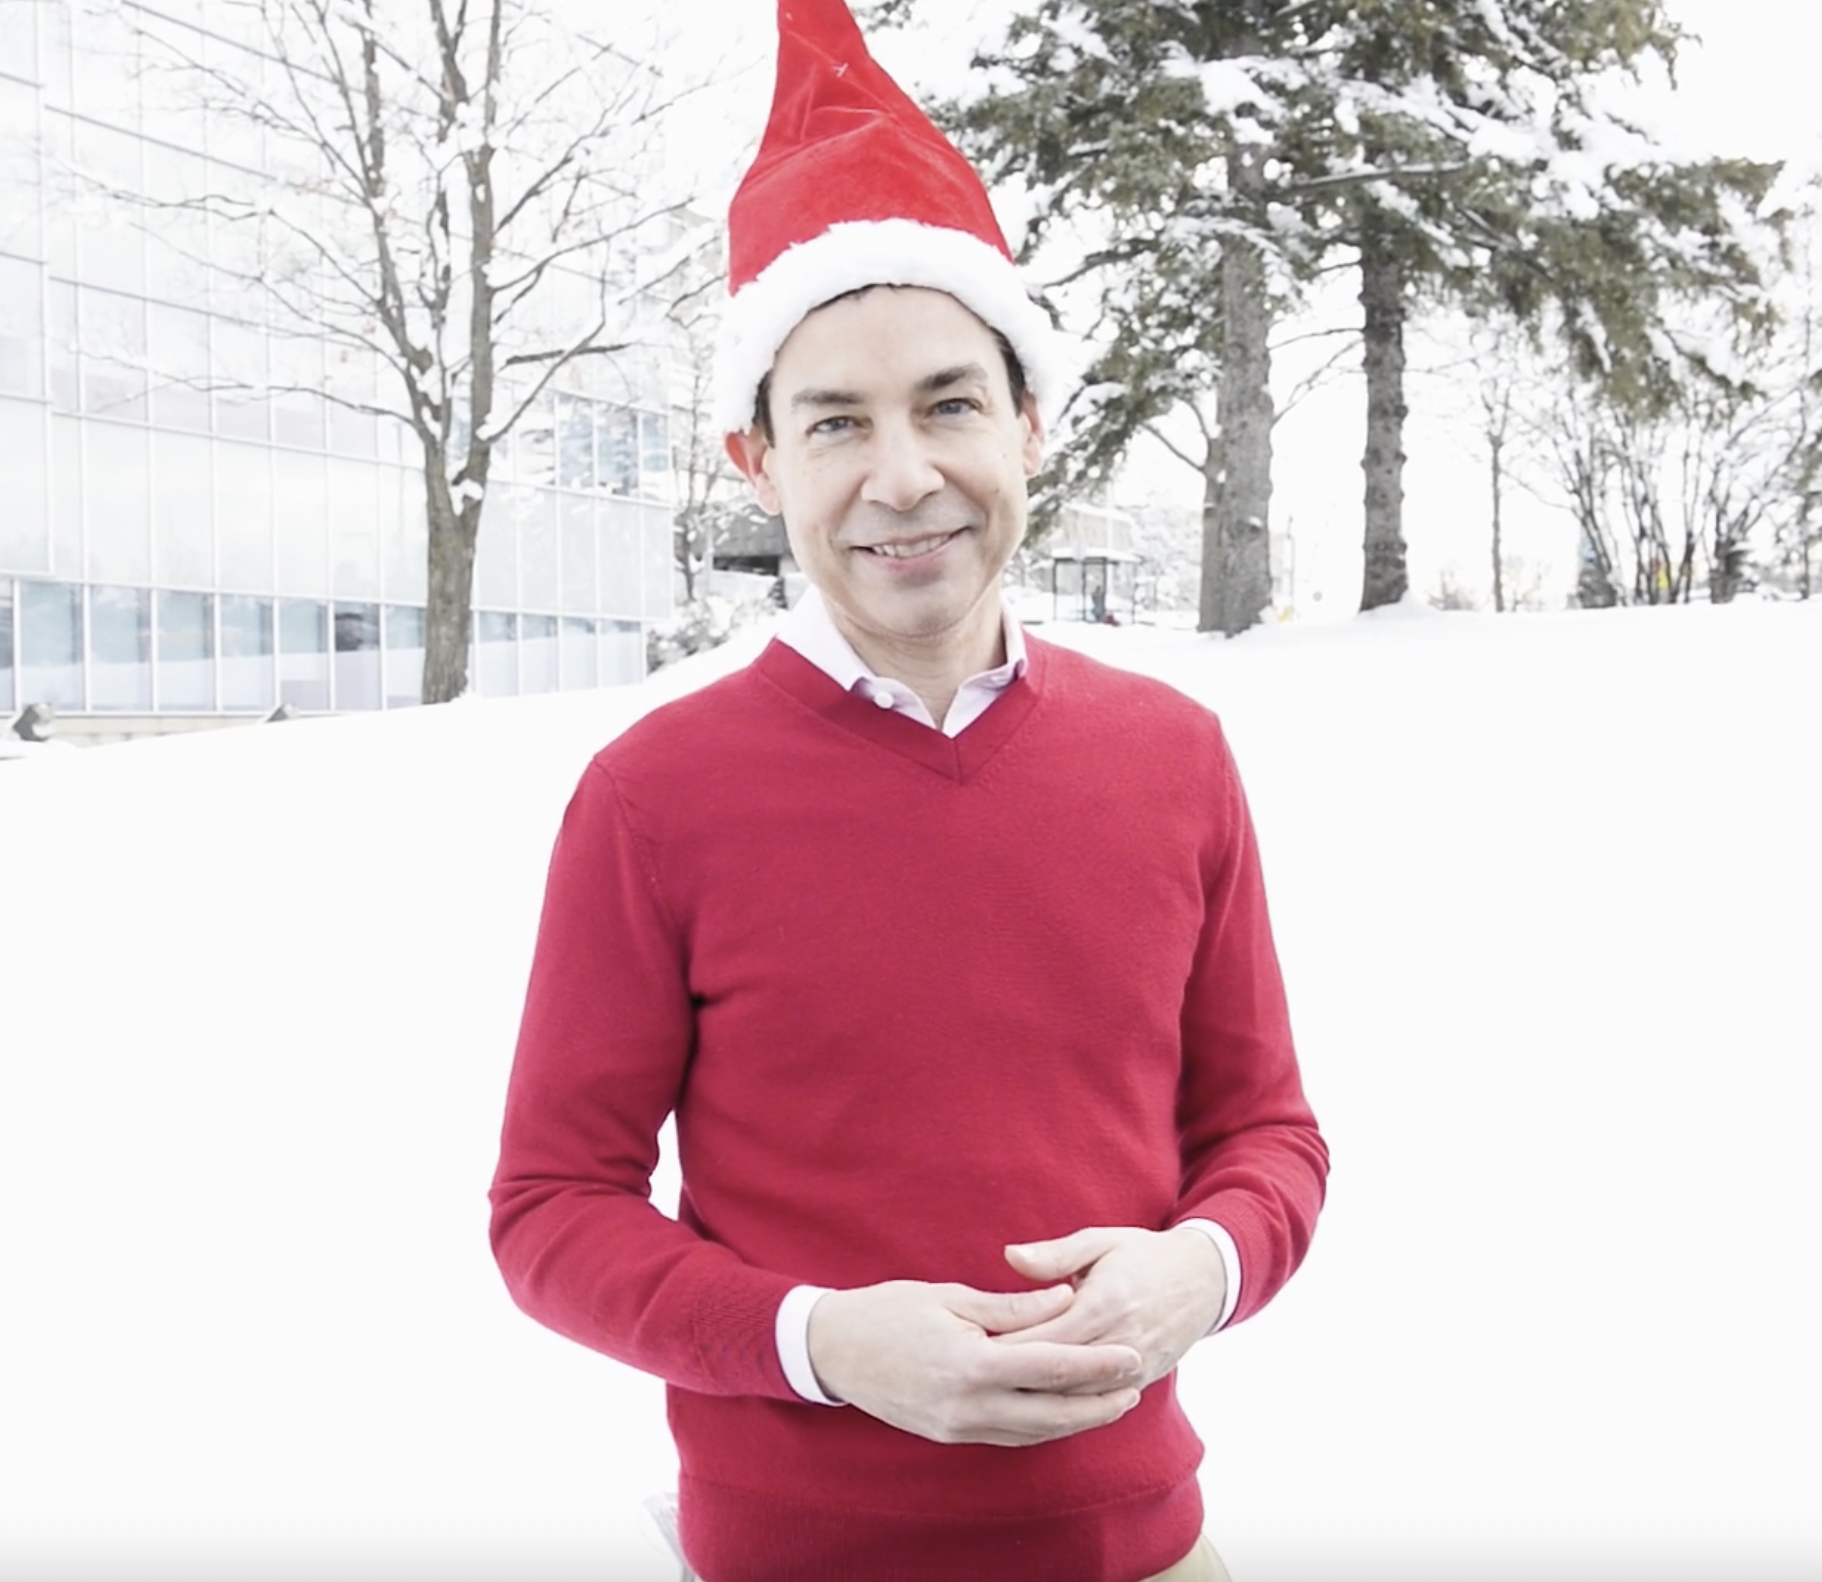 Alex Munter, President and CEO of CHEO, standing outside in a red sweater and santa hat.